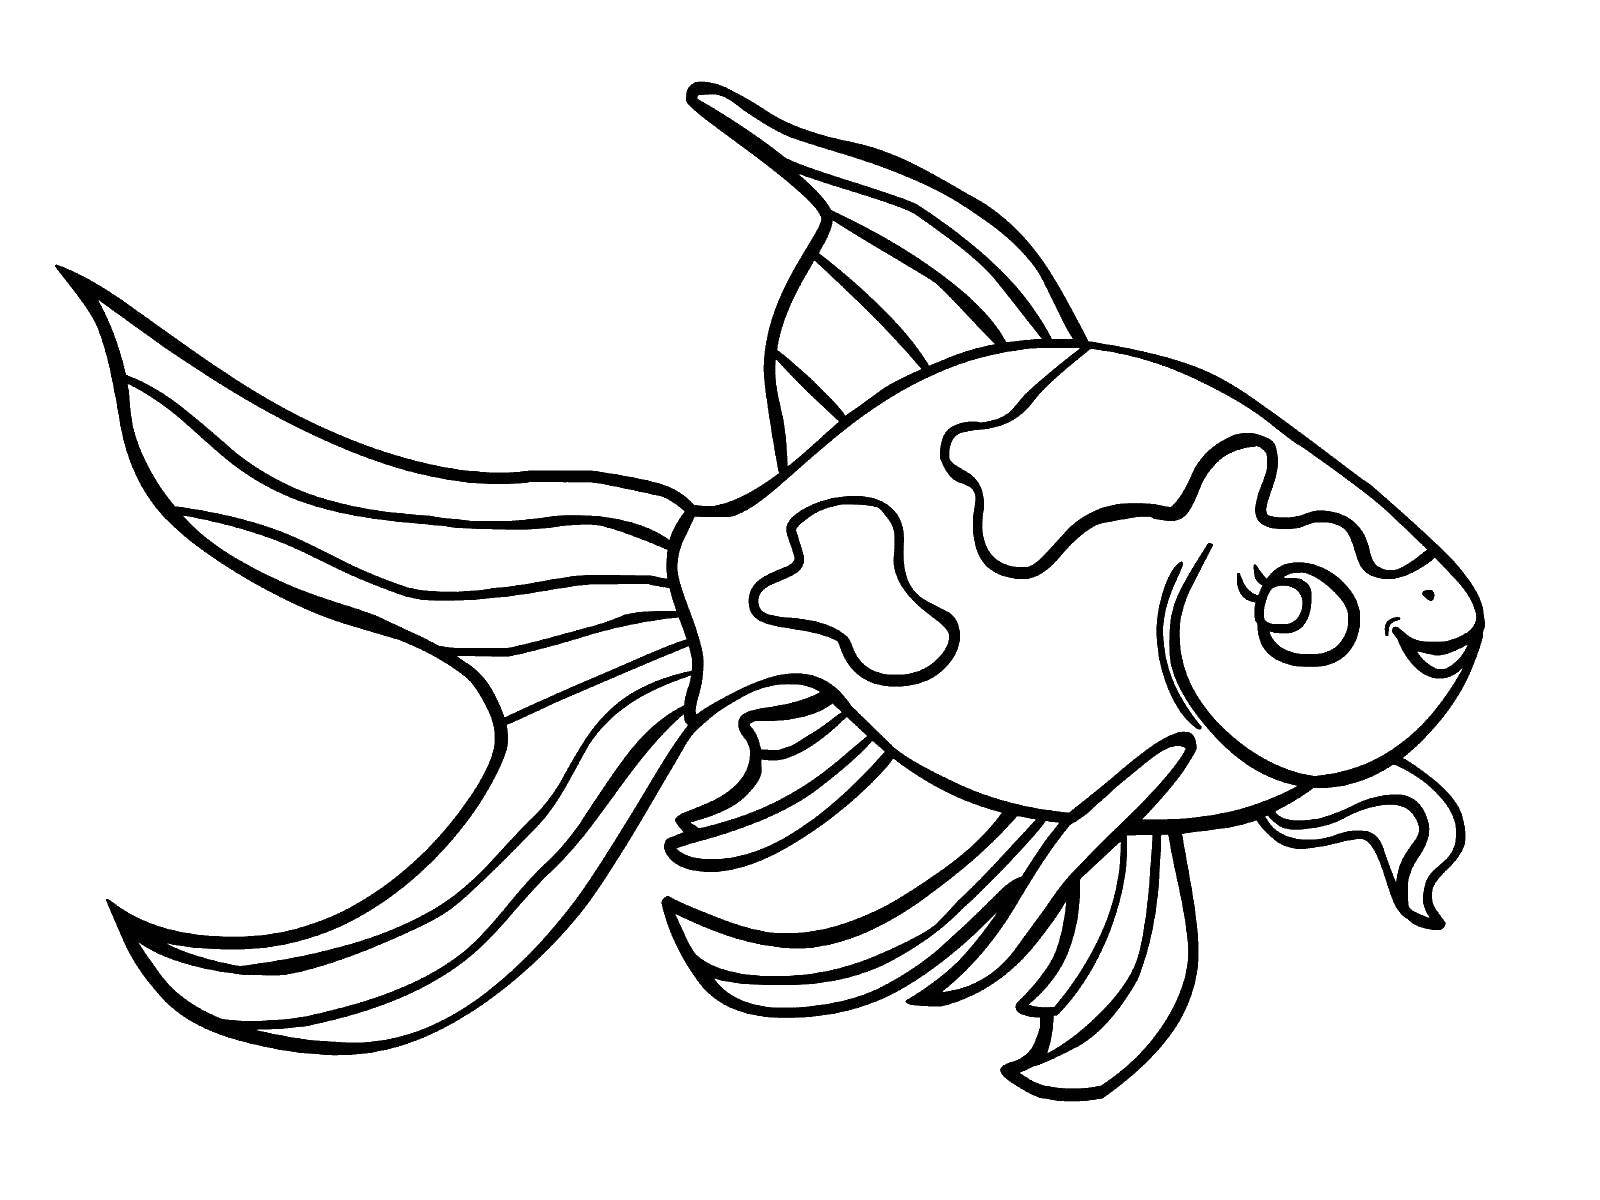 Coloring Playful goldfish. Category Fish. Tags:  Underwater world, fish.